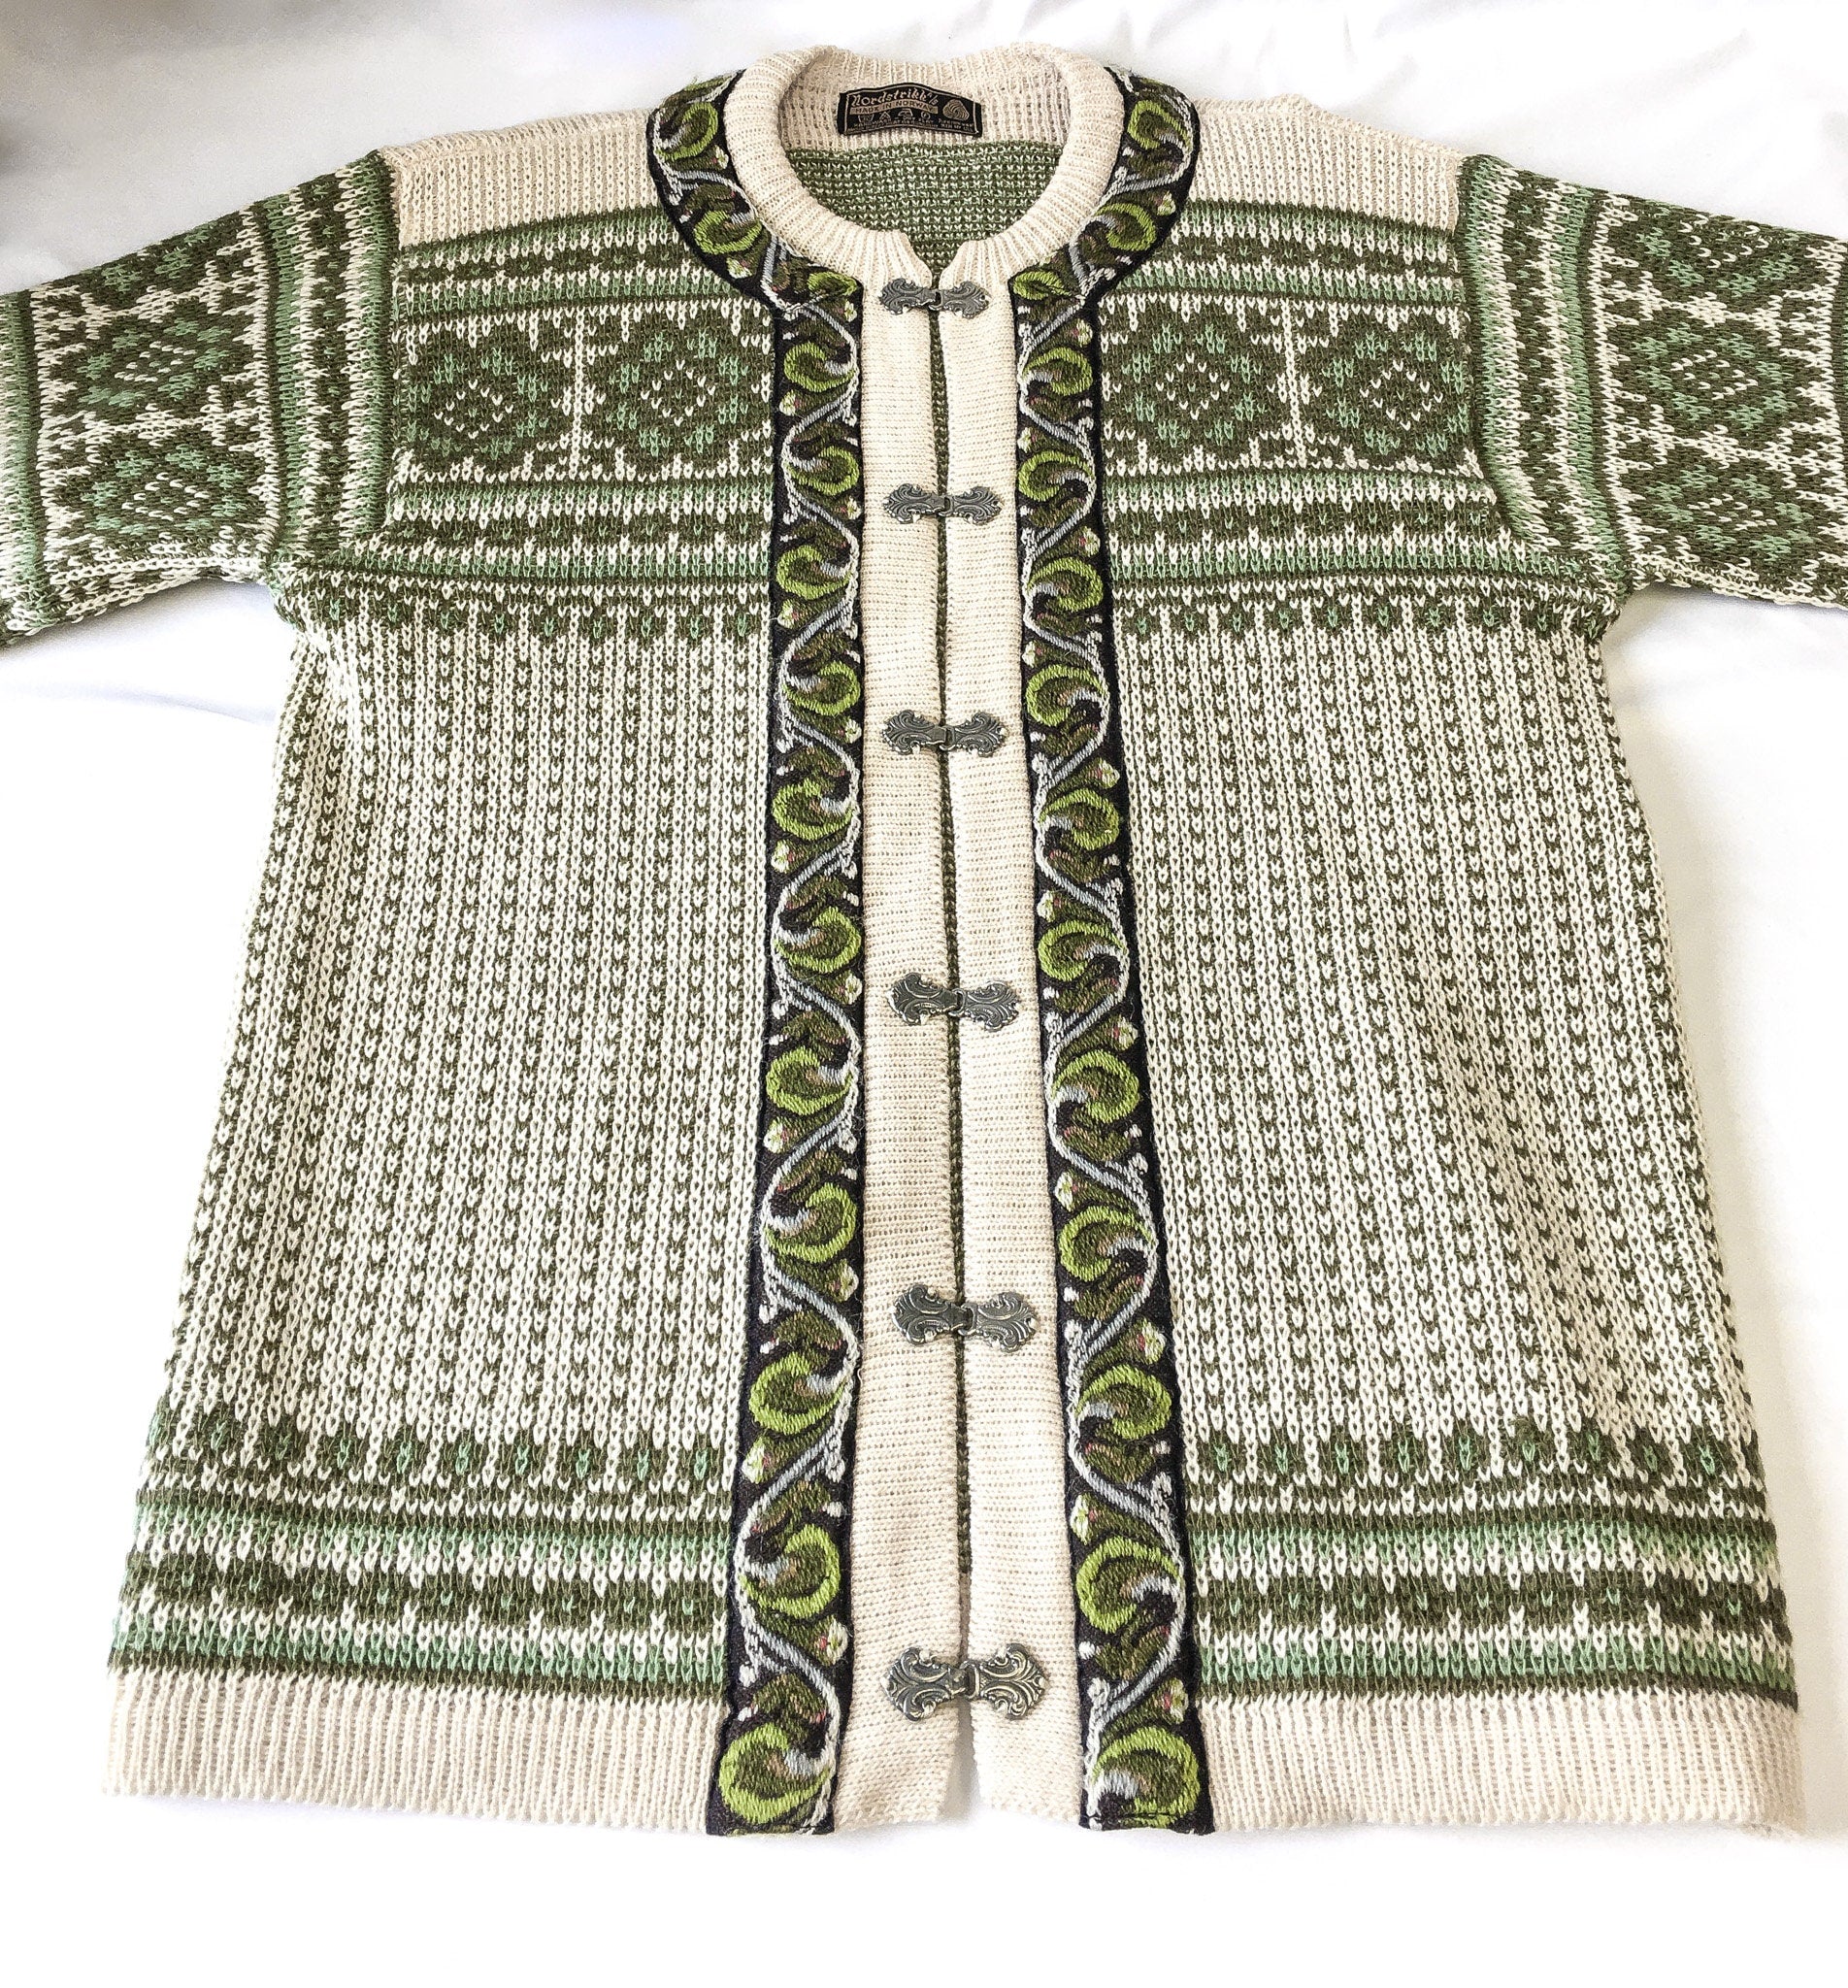 Vintage 90s Nordstrikk Cream/Off-White & Green Floral Embroidered Wool Sweater, Pure Wool Nordic Clasp Cardigan